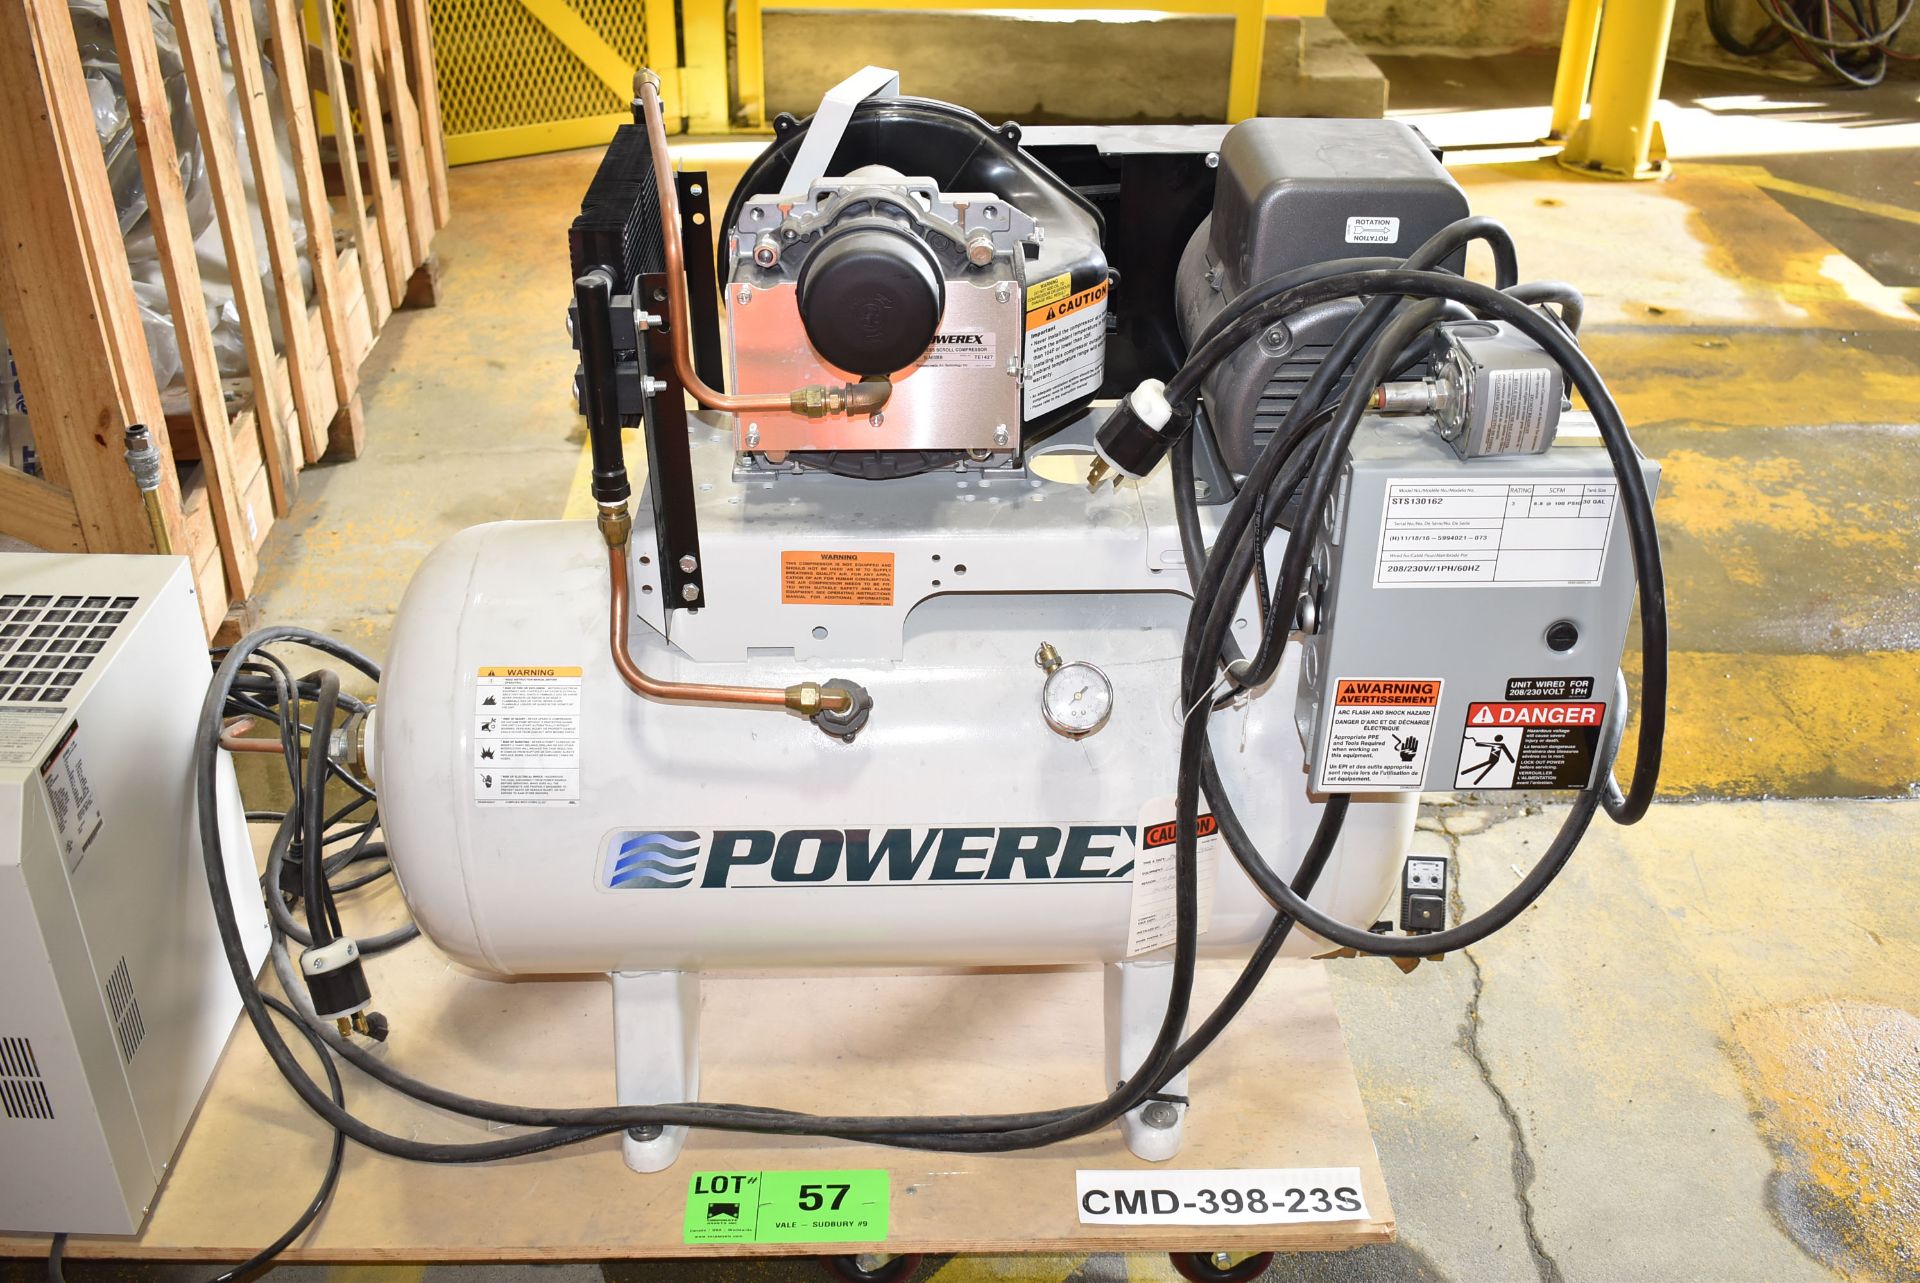 LOT/ POWEREX STS130162 3 HP AIR COMPRESSOR WITH 30 GAL TANK, 8.8 SCFM @ 100 PSIG CAPACITY & SMC - Image 2 of 10